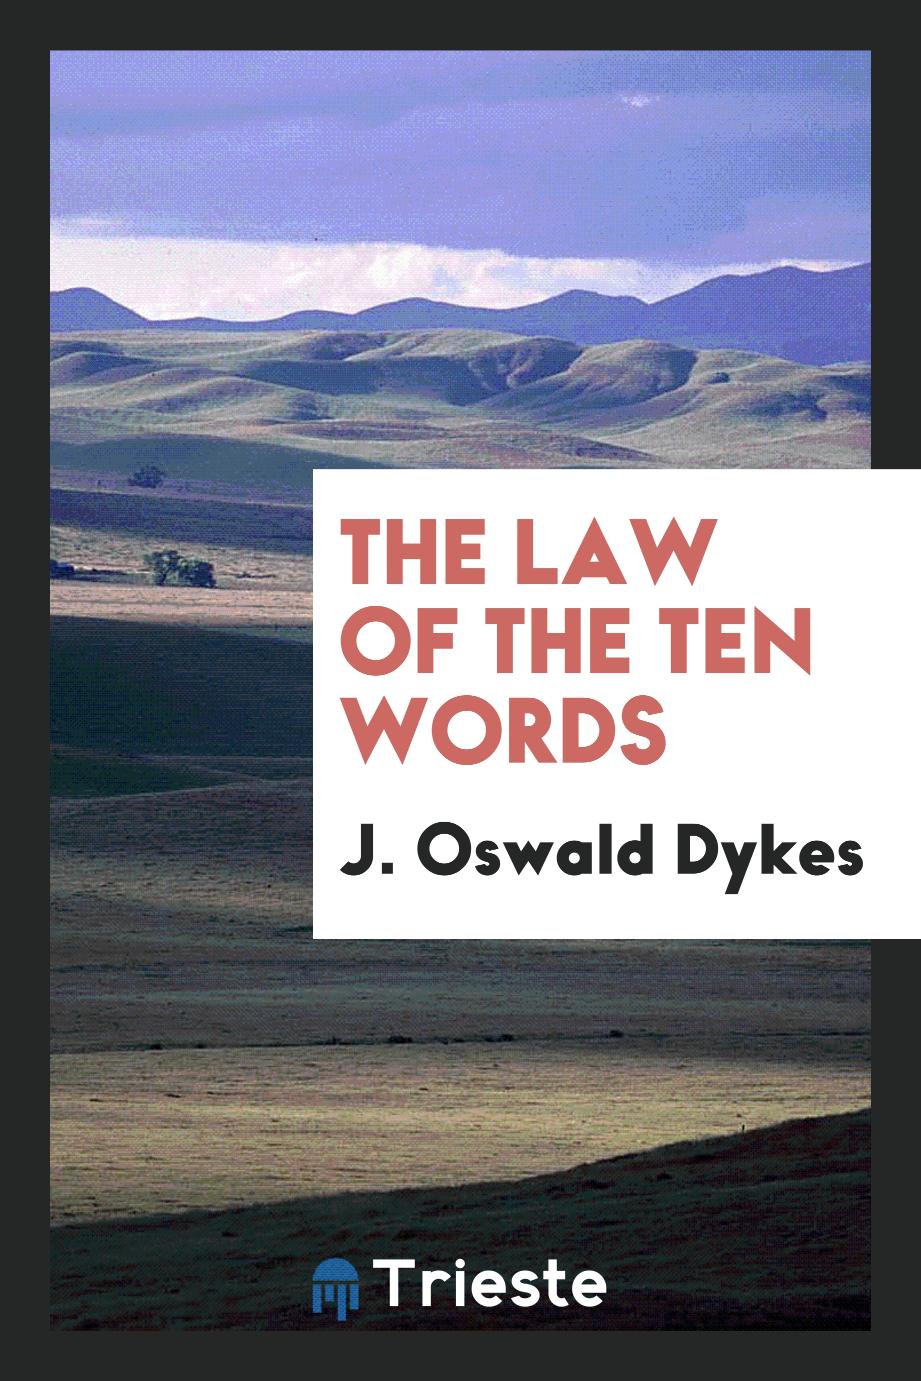 J. Oswald Dykes - The law of the ten words